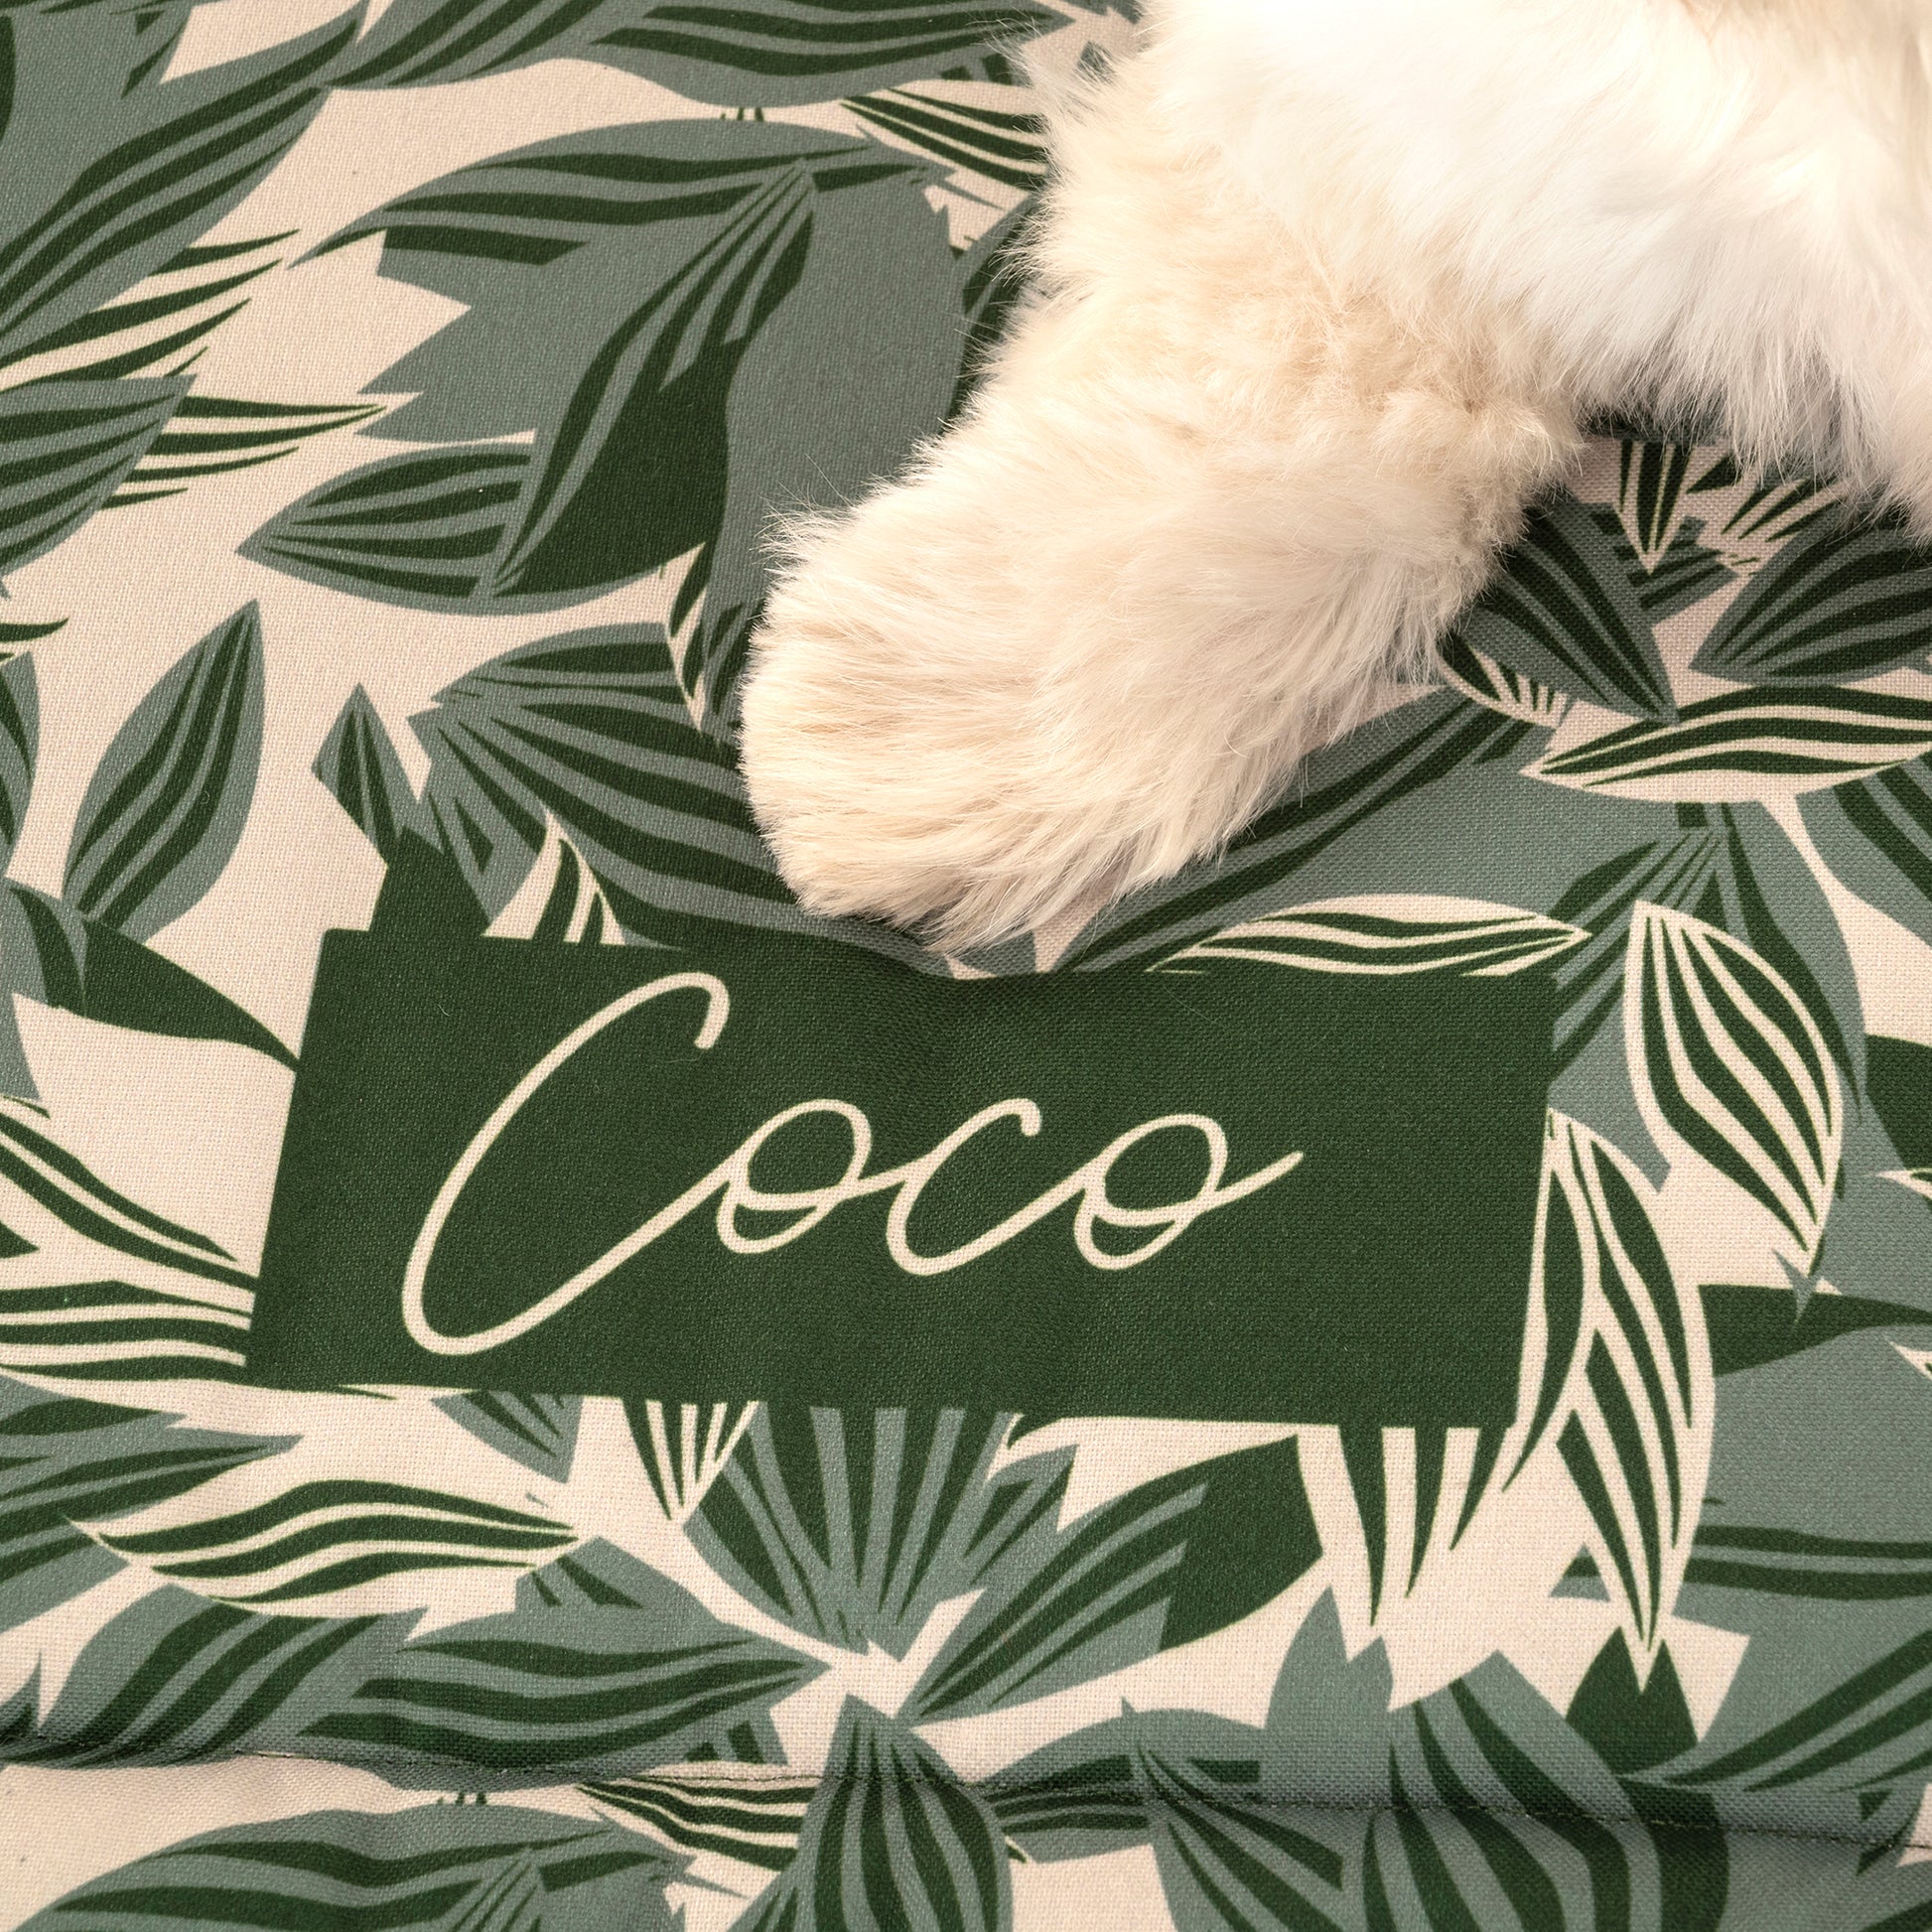 HUFT Personalised Tropical Breeze Comfort Dog & Cat Mat - Heads Up For Tails